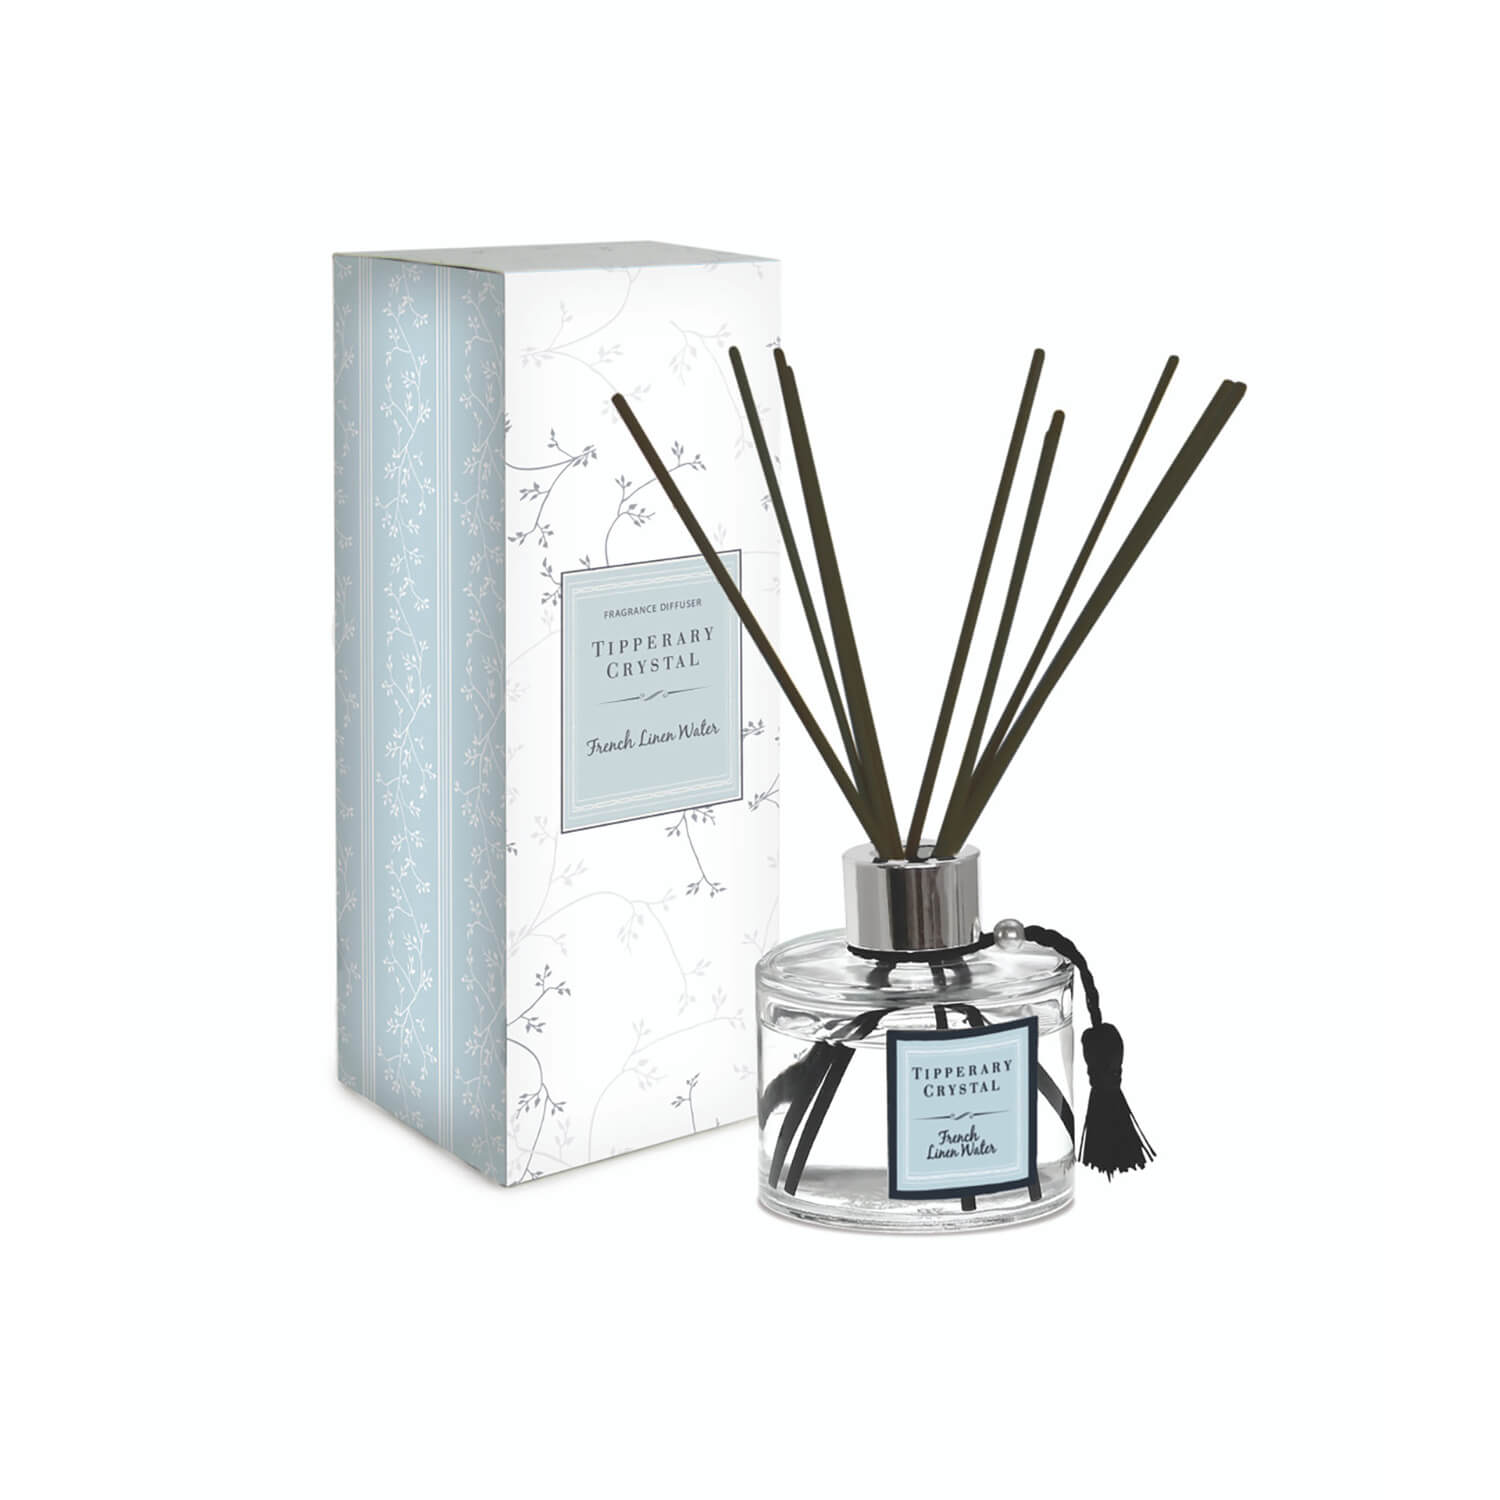 Tipperary Crystal Fragranced Reed Diffuser Set - French Linen 1 Shaws Department Stores